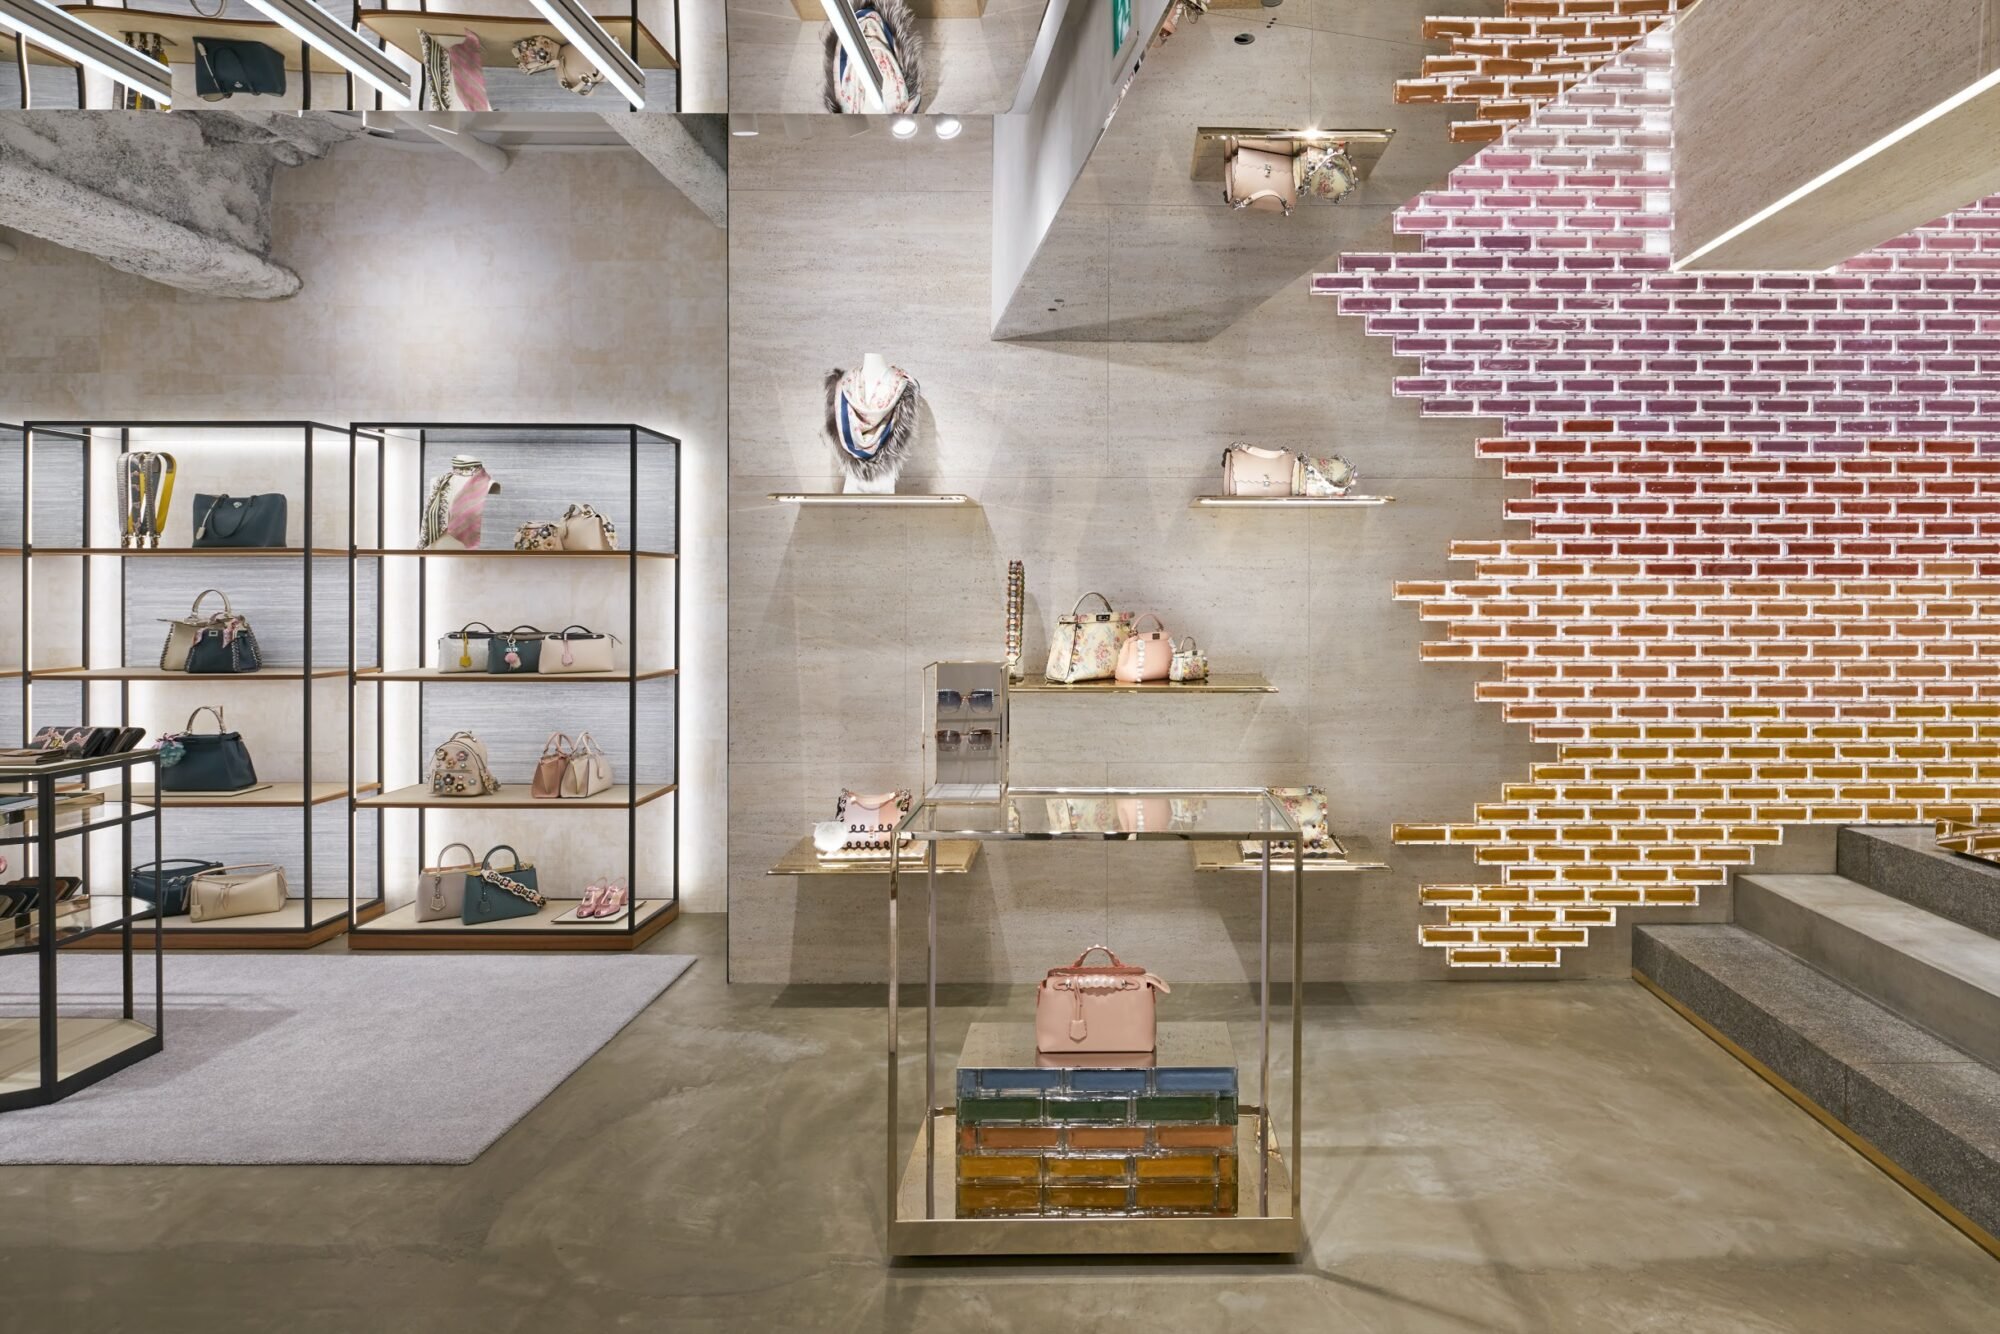 Fendi Store in Tokyo: steel and glass construction made by seele